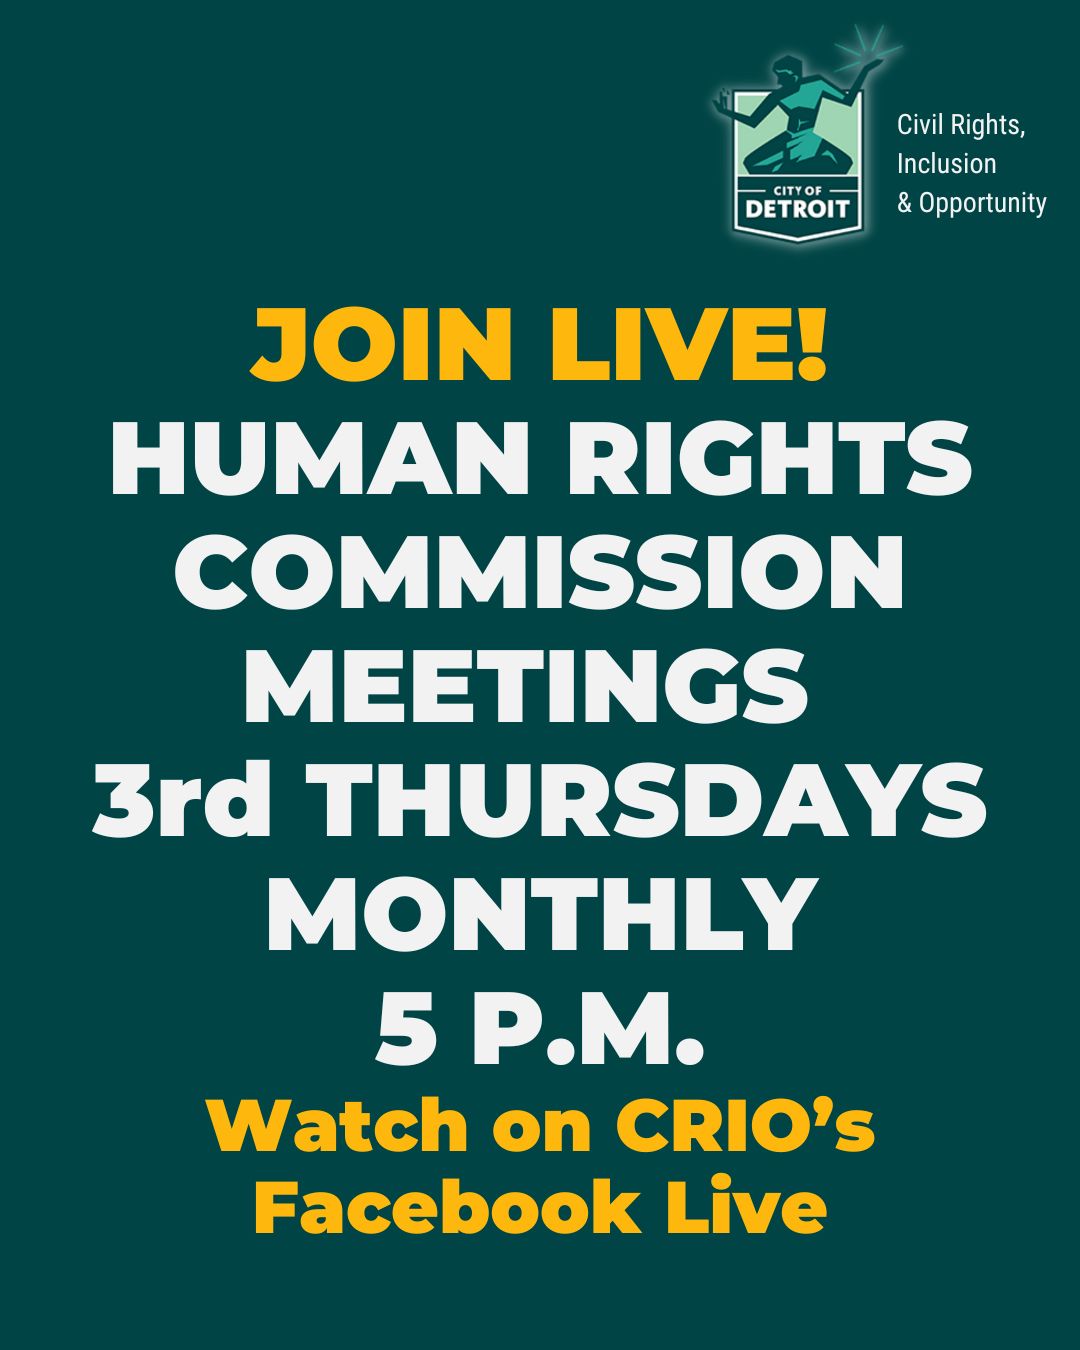 Join Live! Human Rights Commission Meetings 3rd Thursdays Monthly 5 P.M. Watch on CRIO's Facebook Live